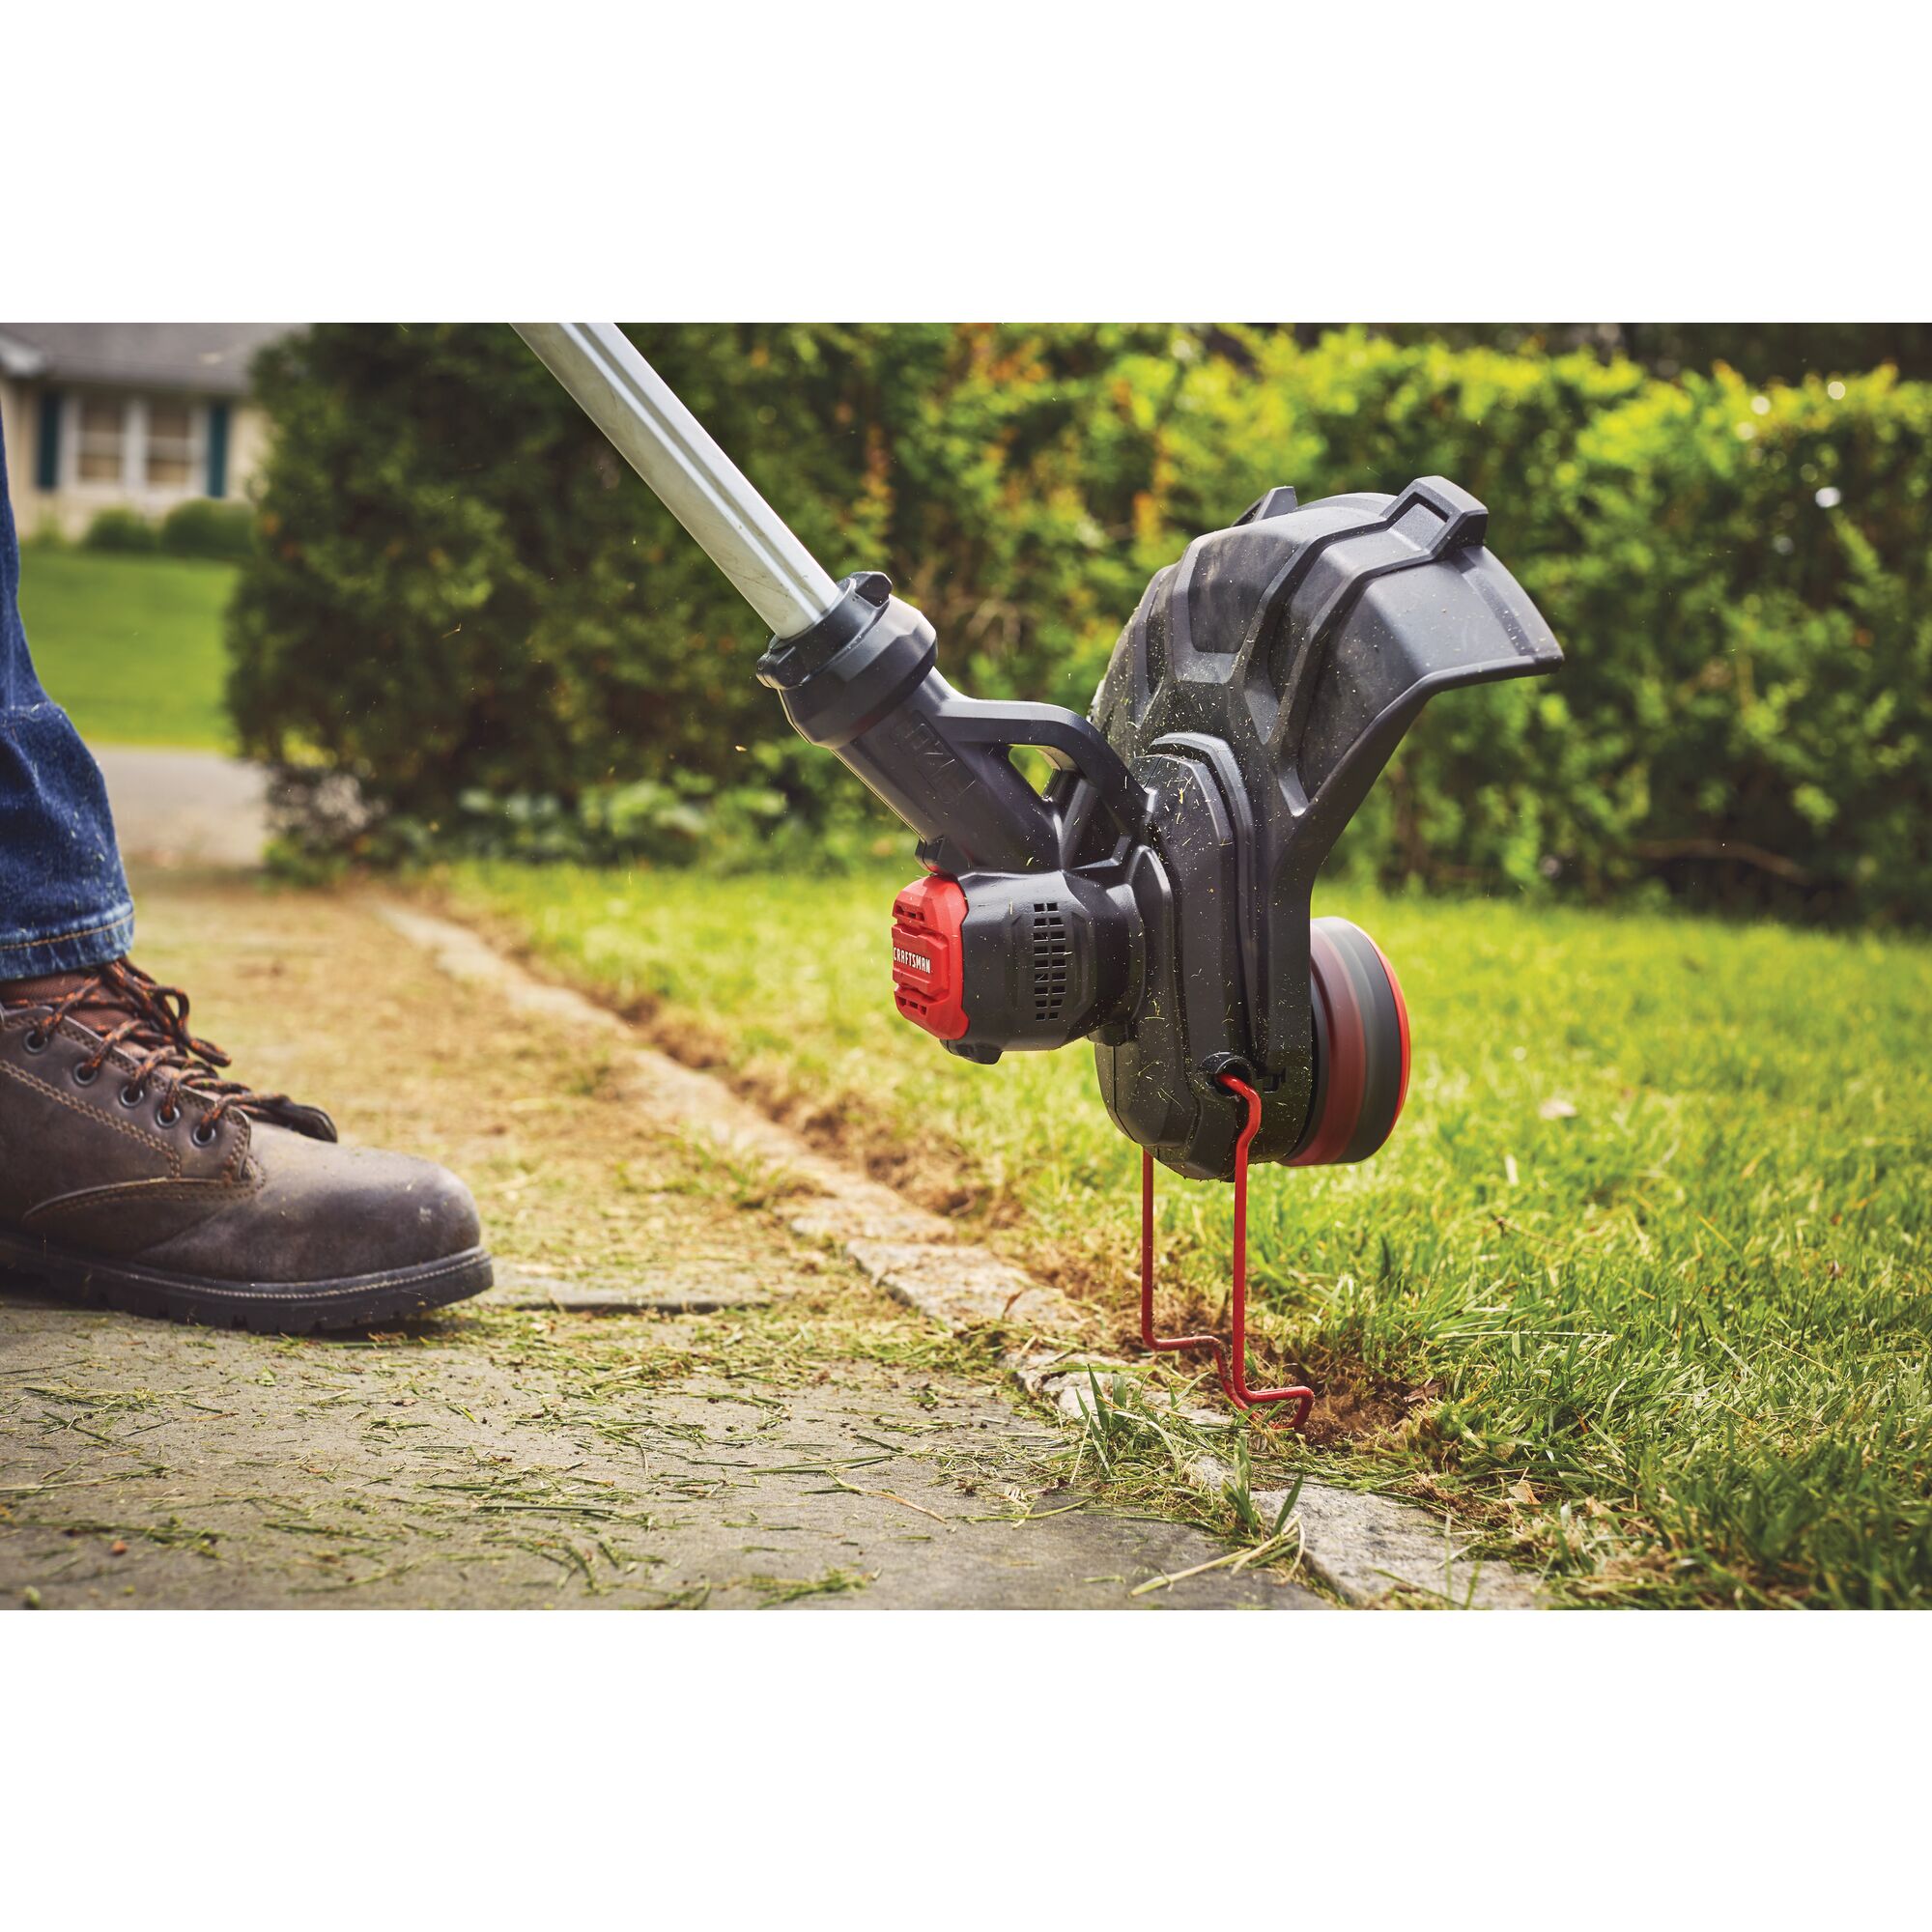 Ergonomic telescoping pole feature of 20 volt weedwacker 13 inch cordless string trimmer and edger with automatic feed kit.